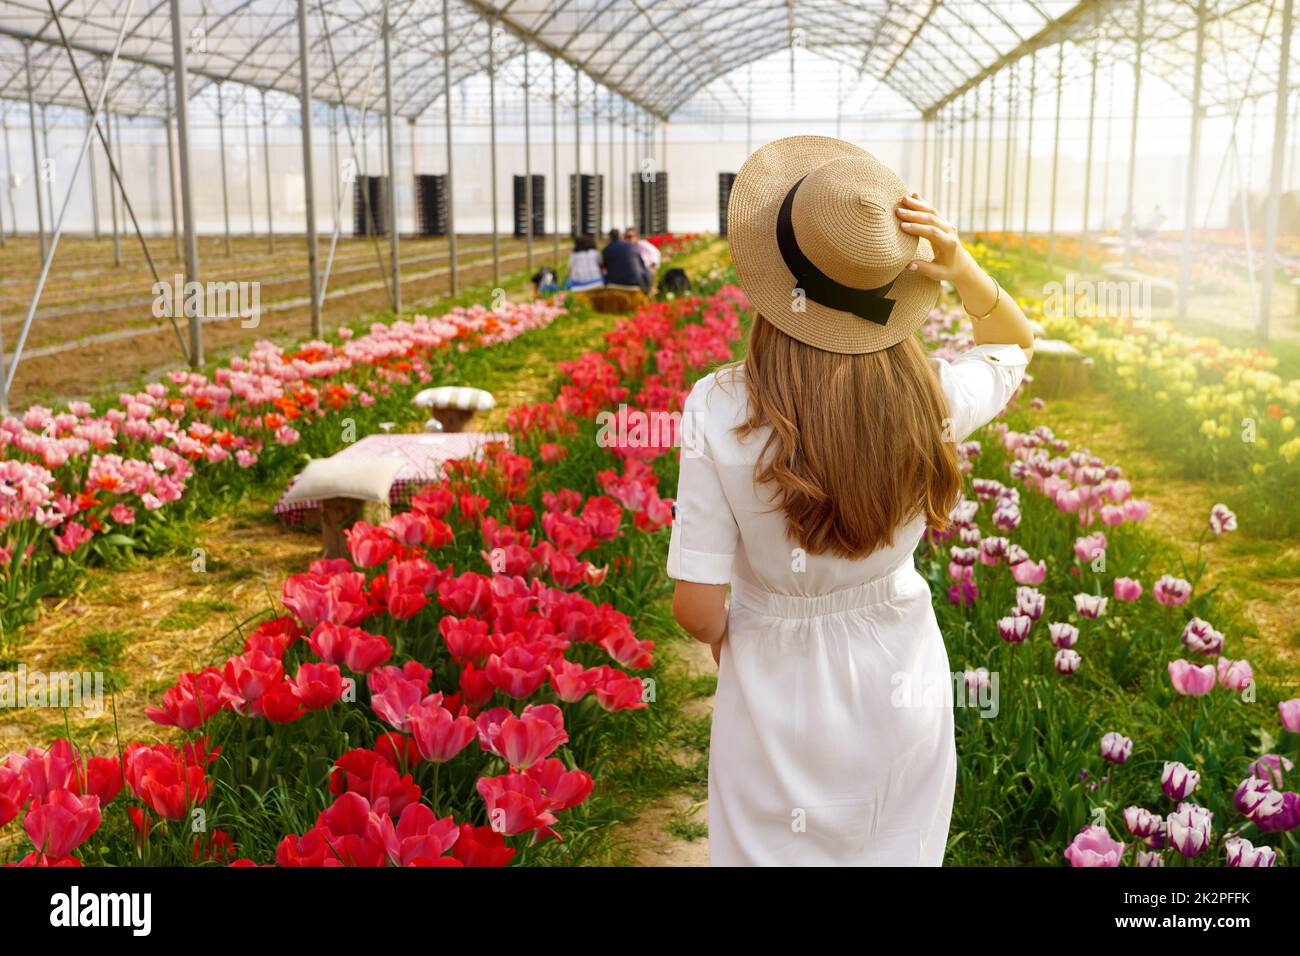 Beautiful girl holds straw hat walking between flowers ready for picnic on sunset. Back view. Stock Photo